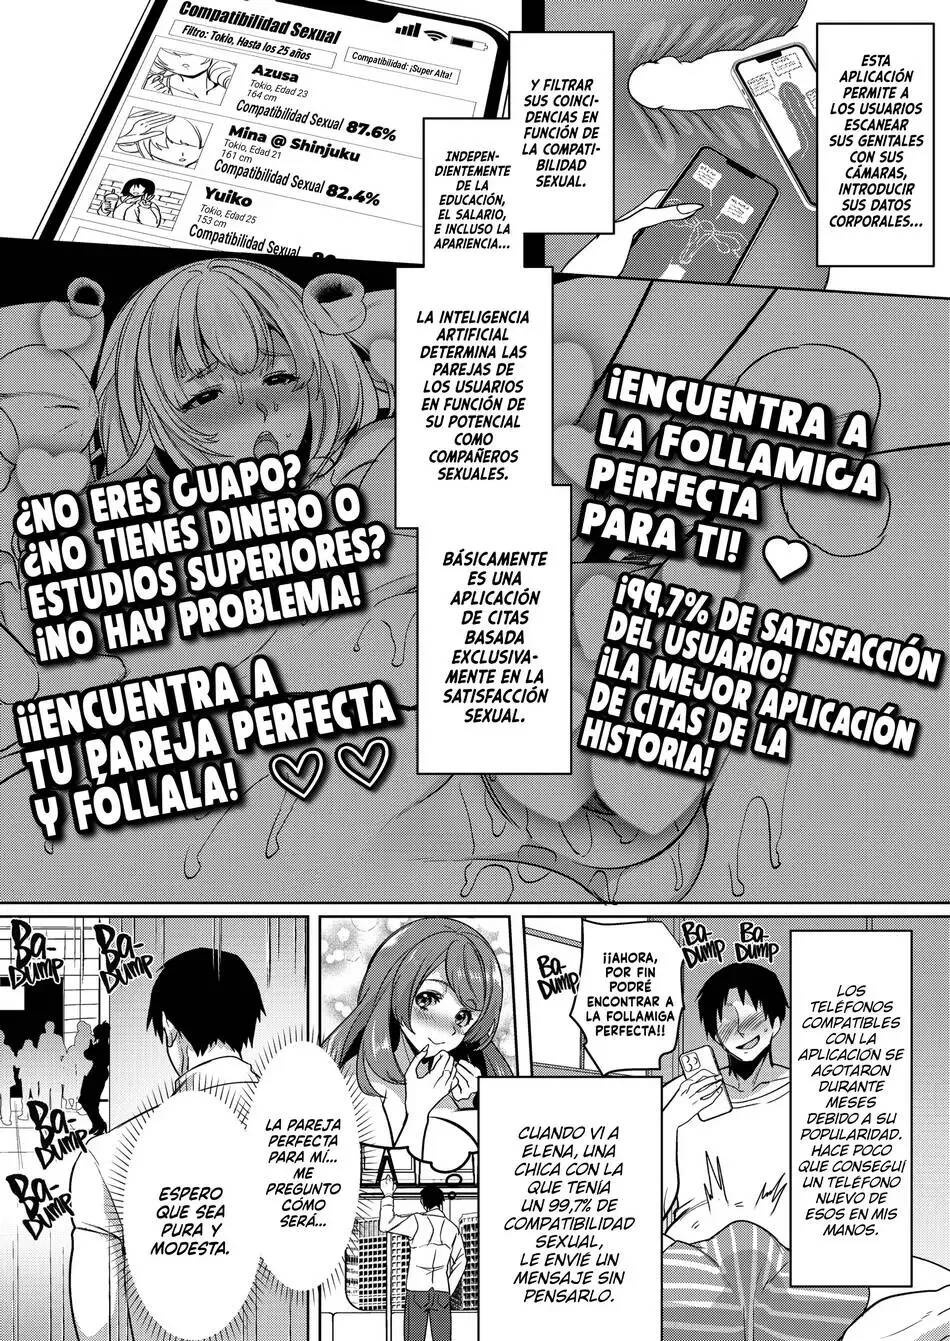 Sexual Application to Attract Whores 1-2 [Spanish] - Page 3